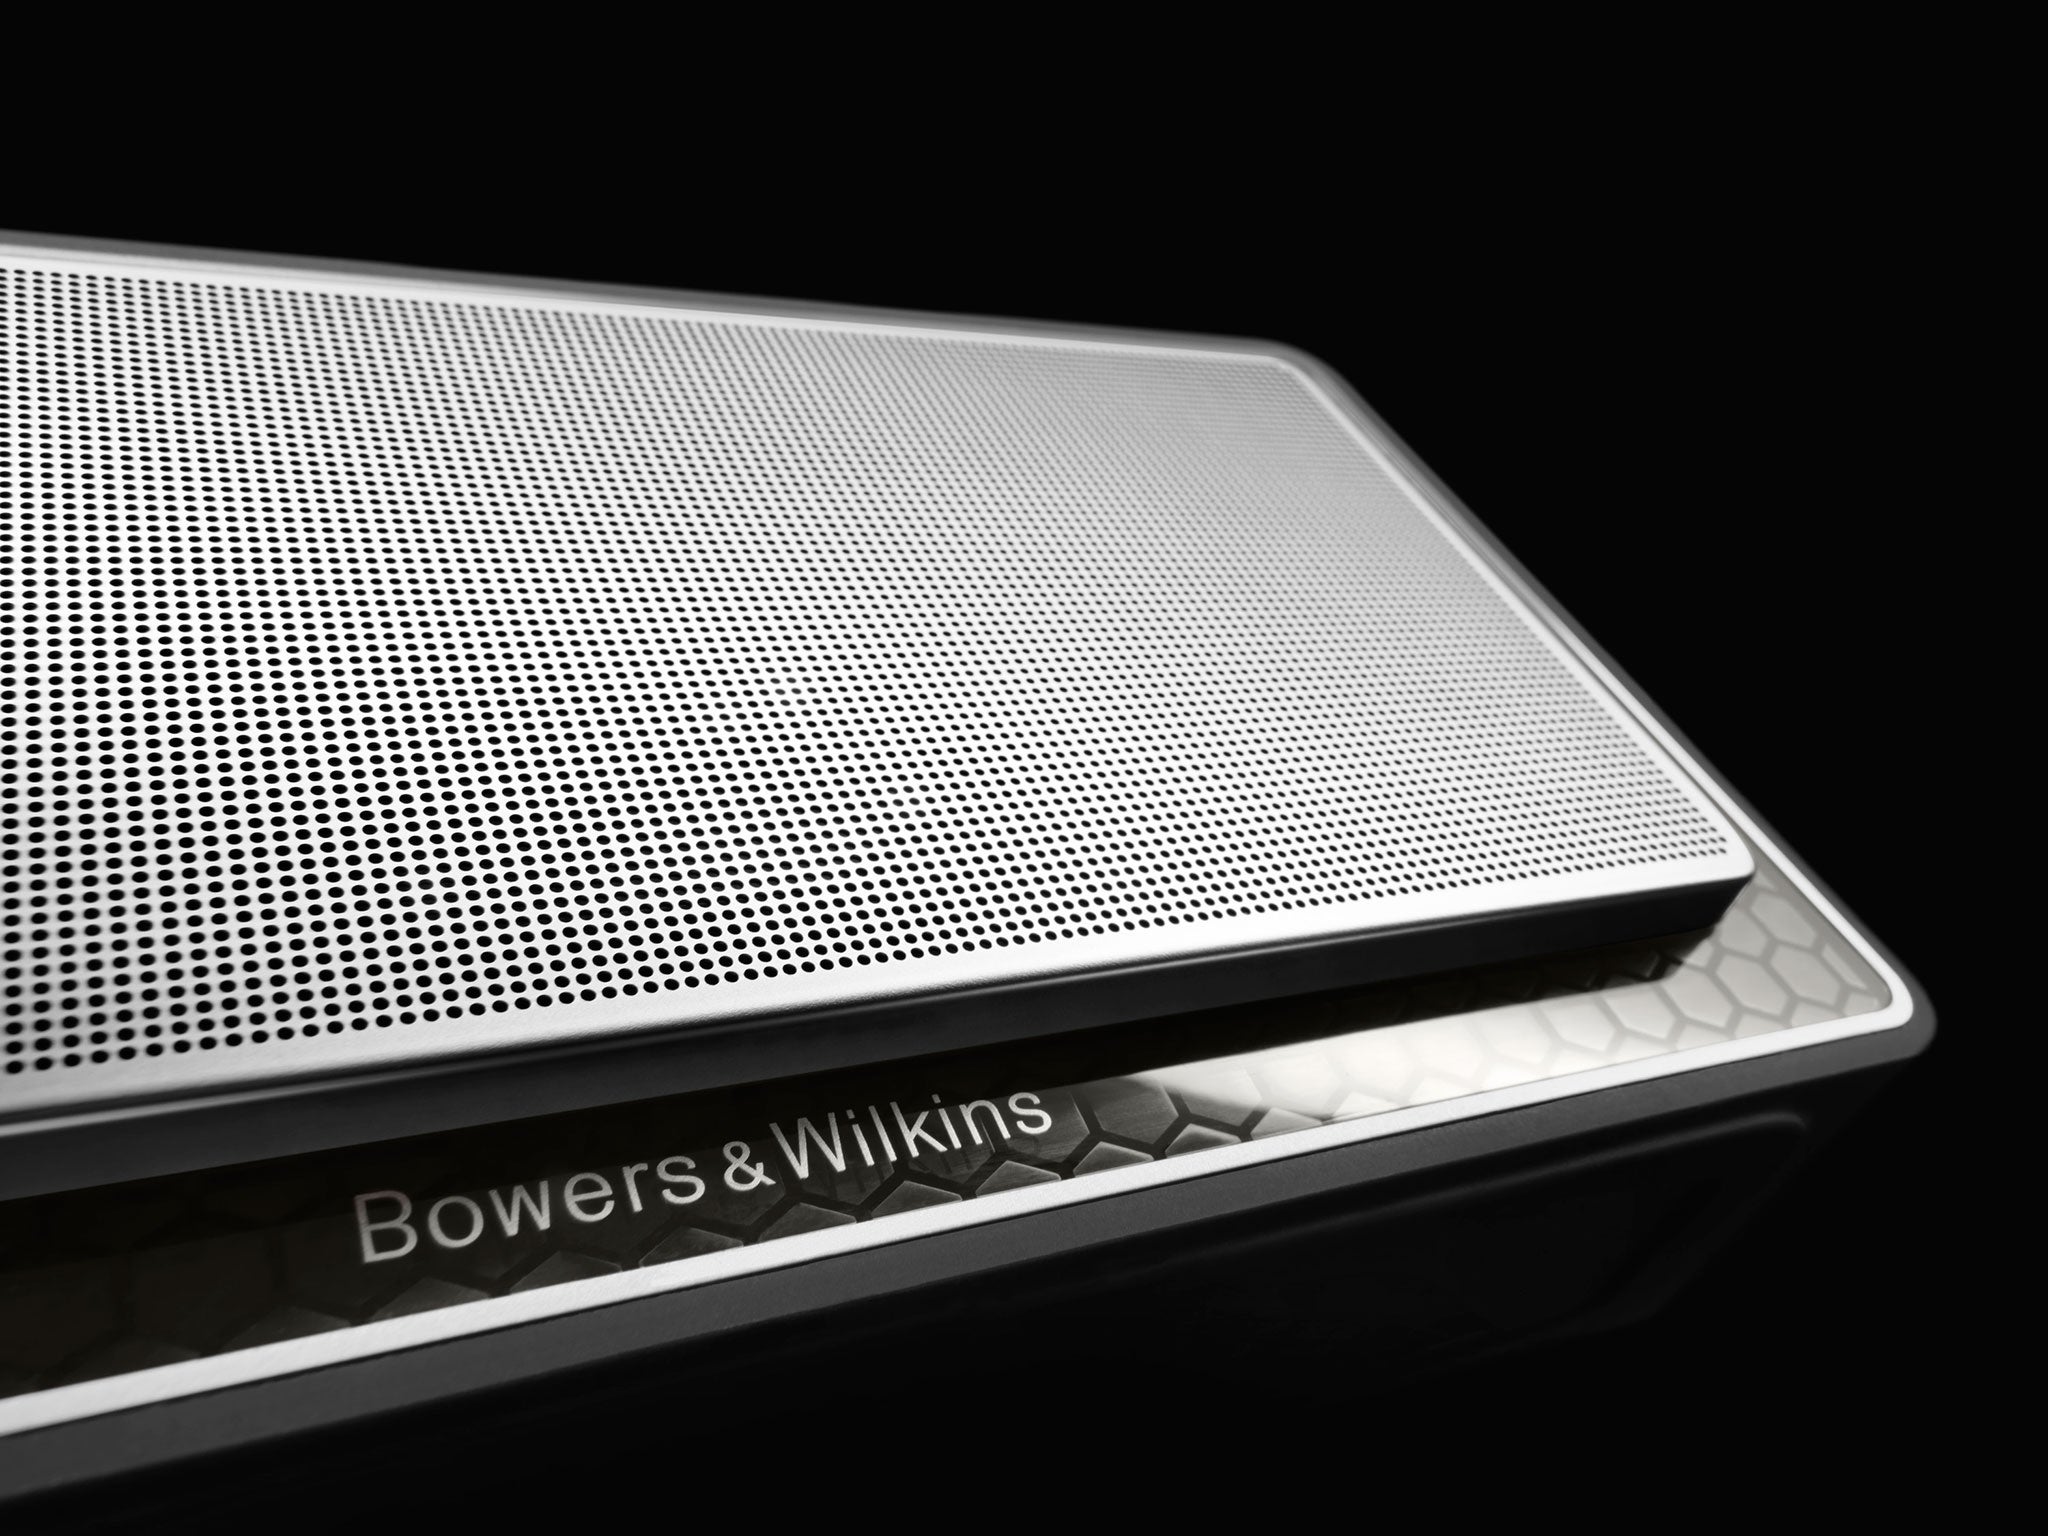 Bowers & Wilkins became a household name before speaker companies had to distinguish themselves through Spotify integrations and voice recognition capability